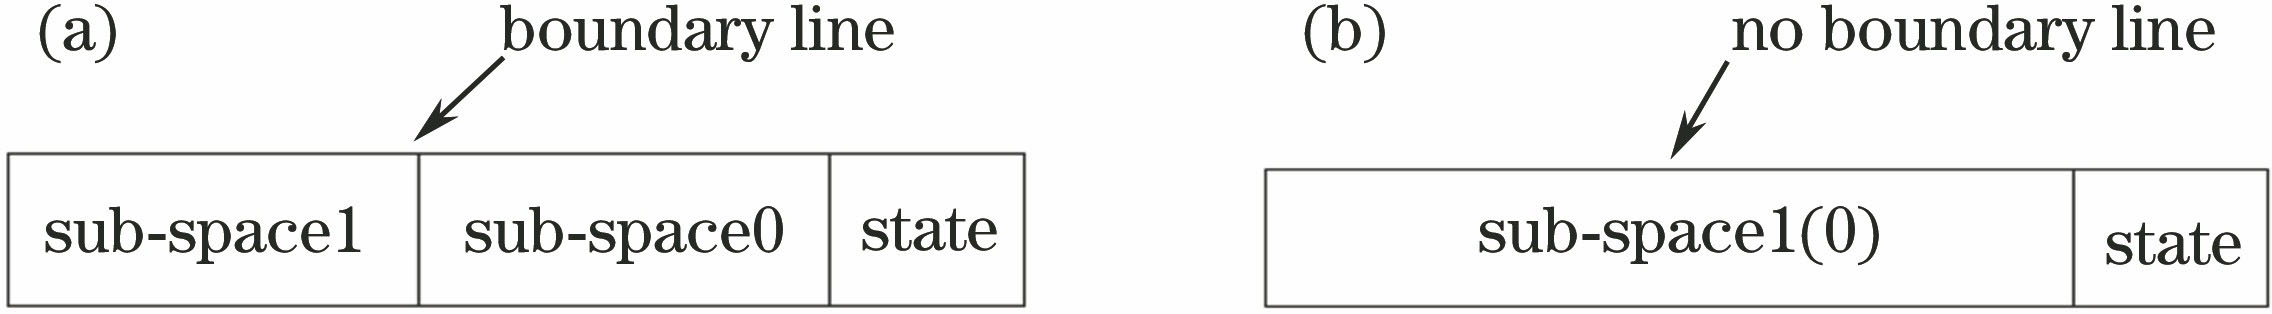 Structure of binary space. (a) State is true; (b) state is false